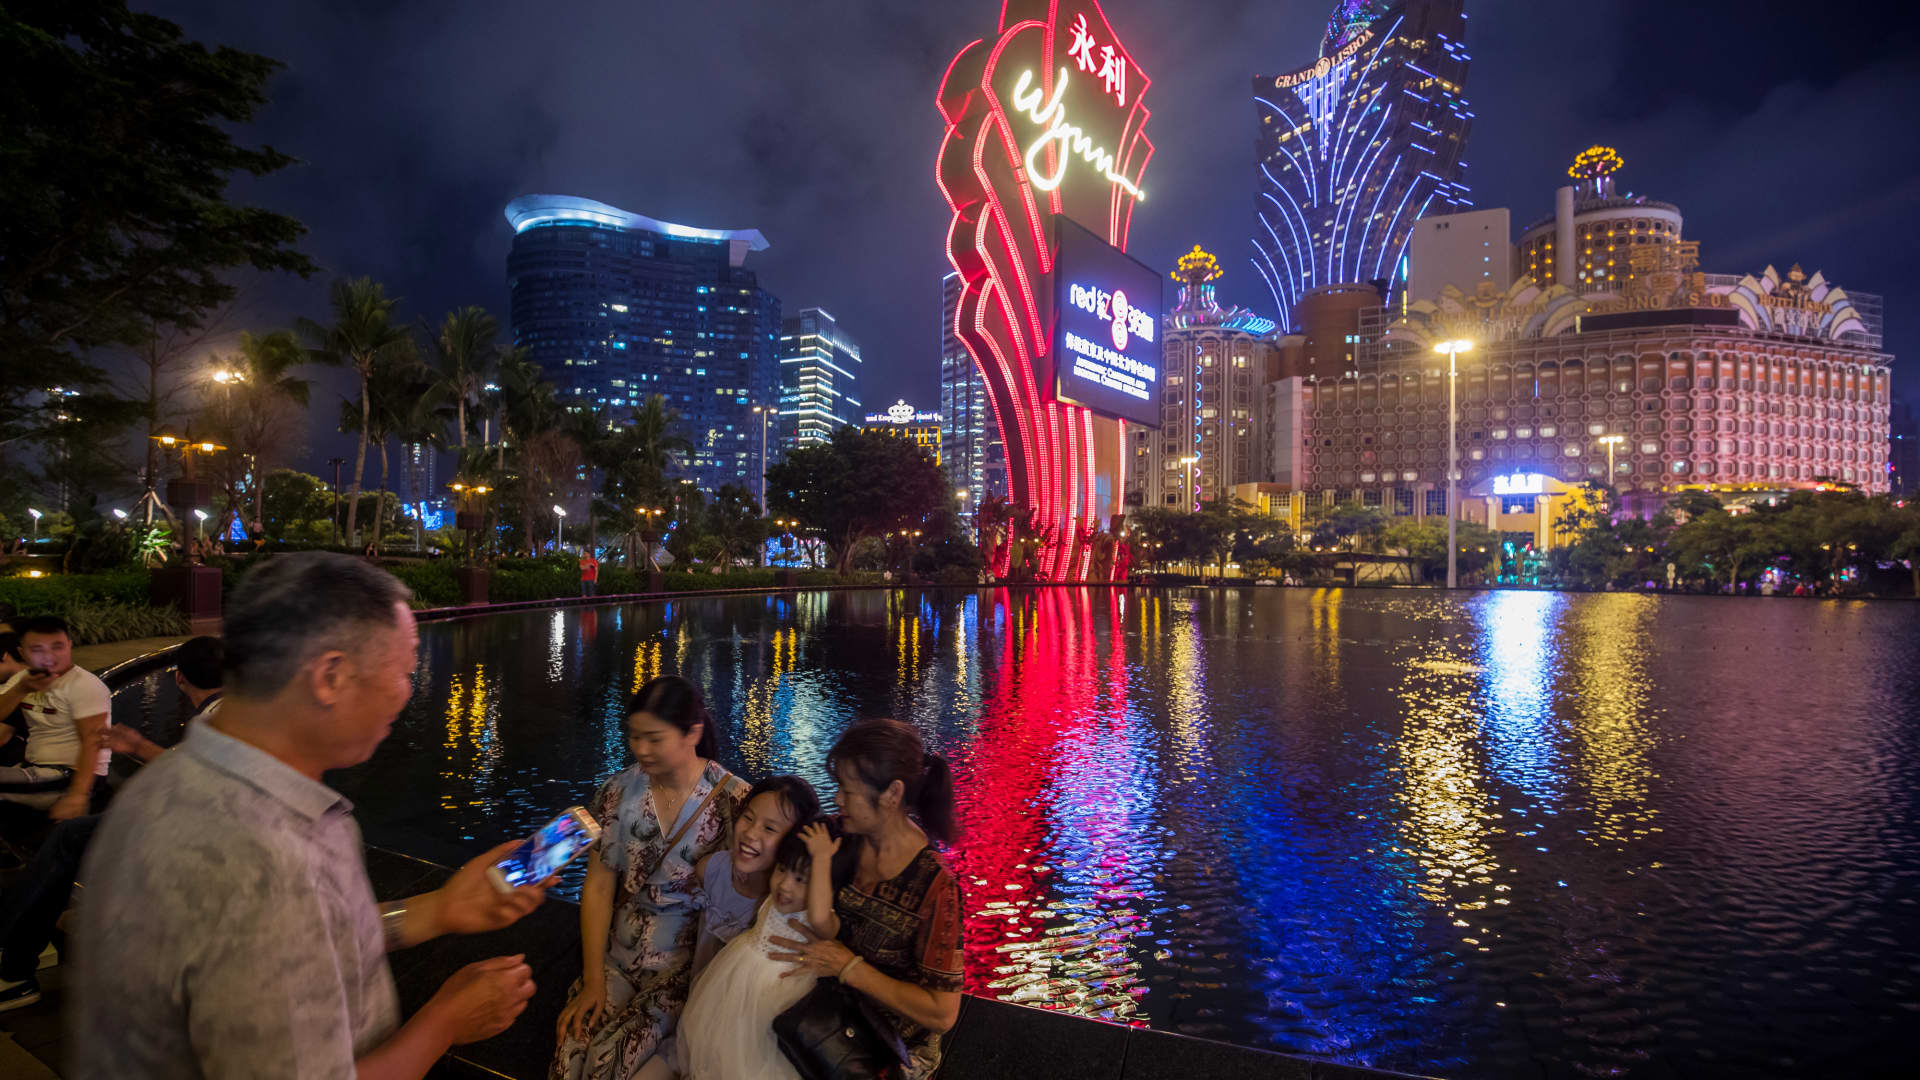 The Wynn Resorts logo stands illuminated as people sit by the fountain at the Wynn Macau casino resort in Macau, China, on Tuesday, July 24, 2018.